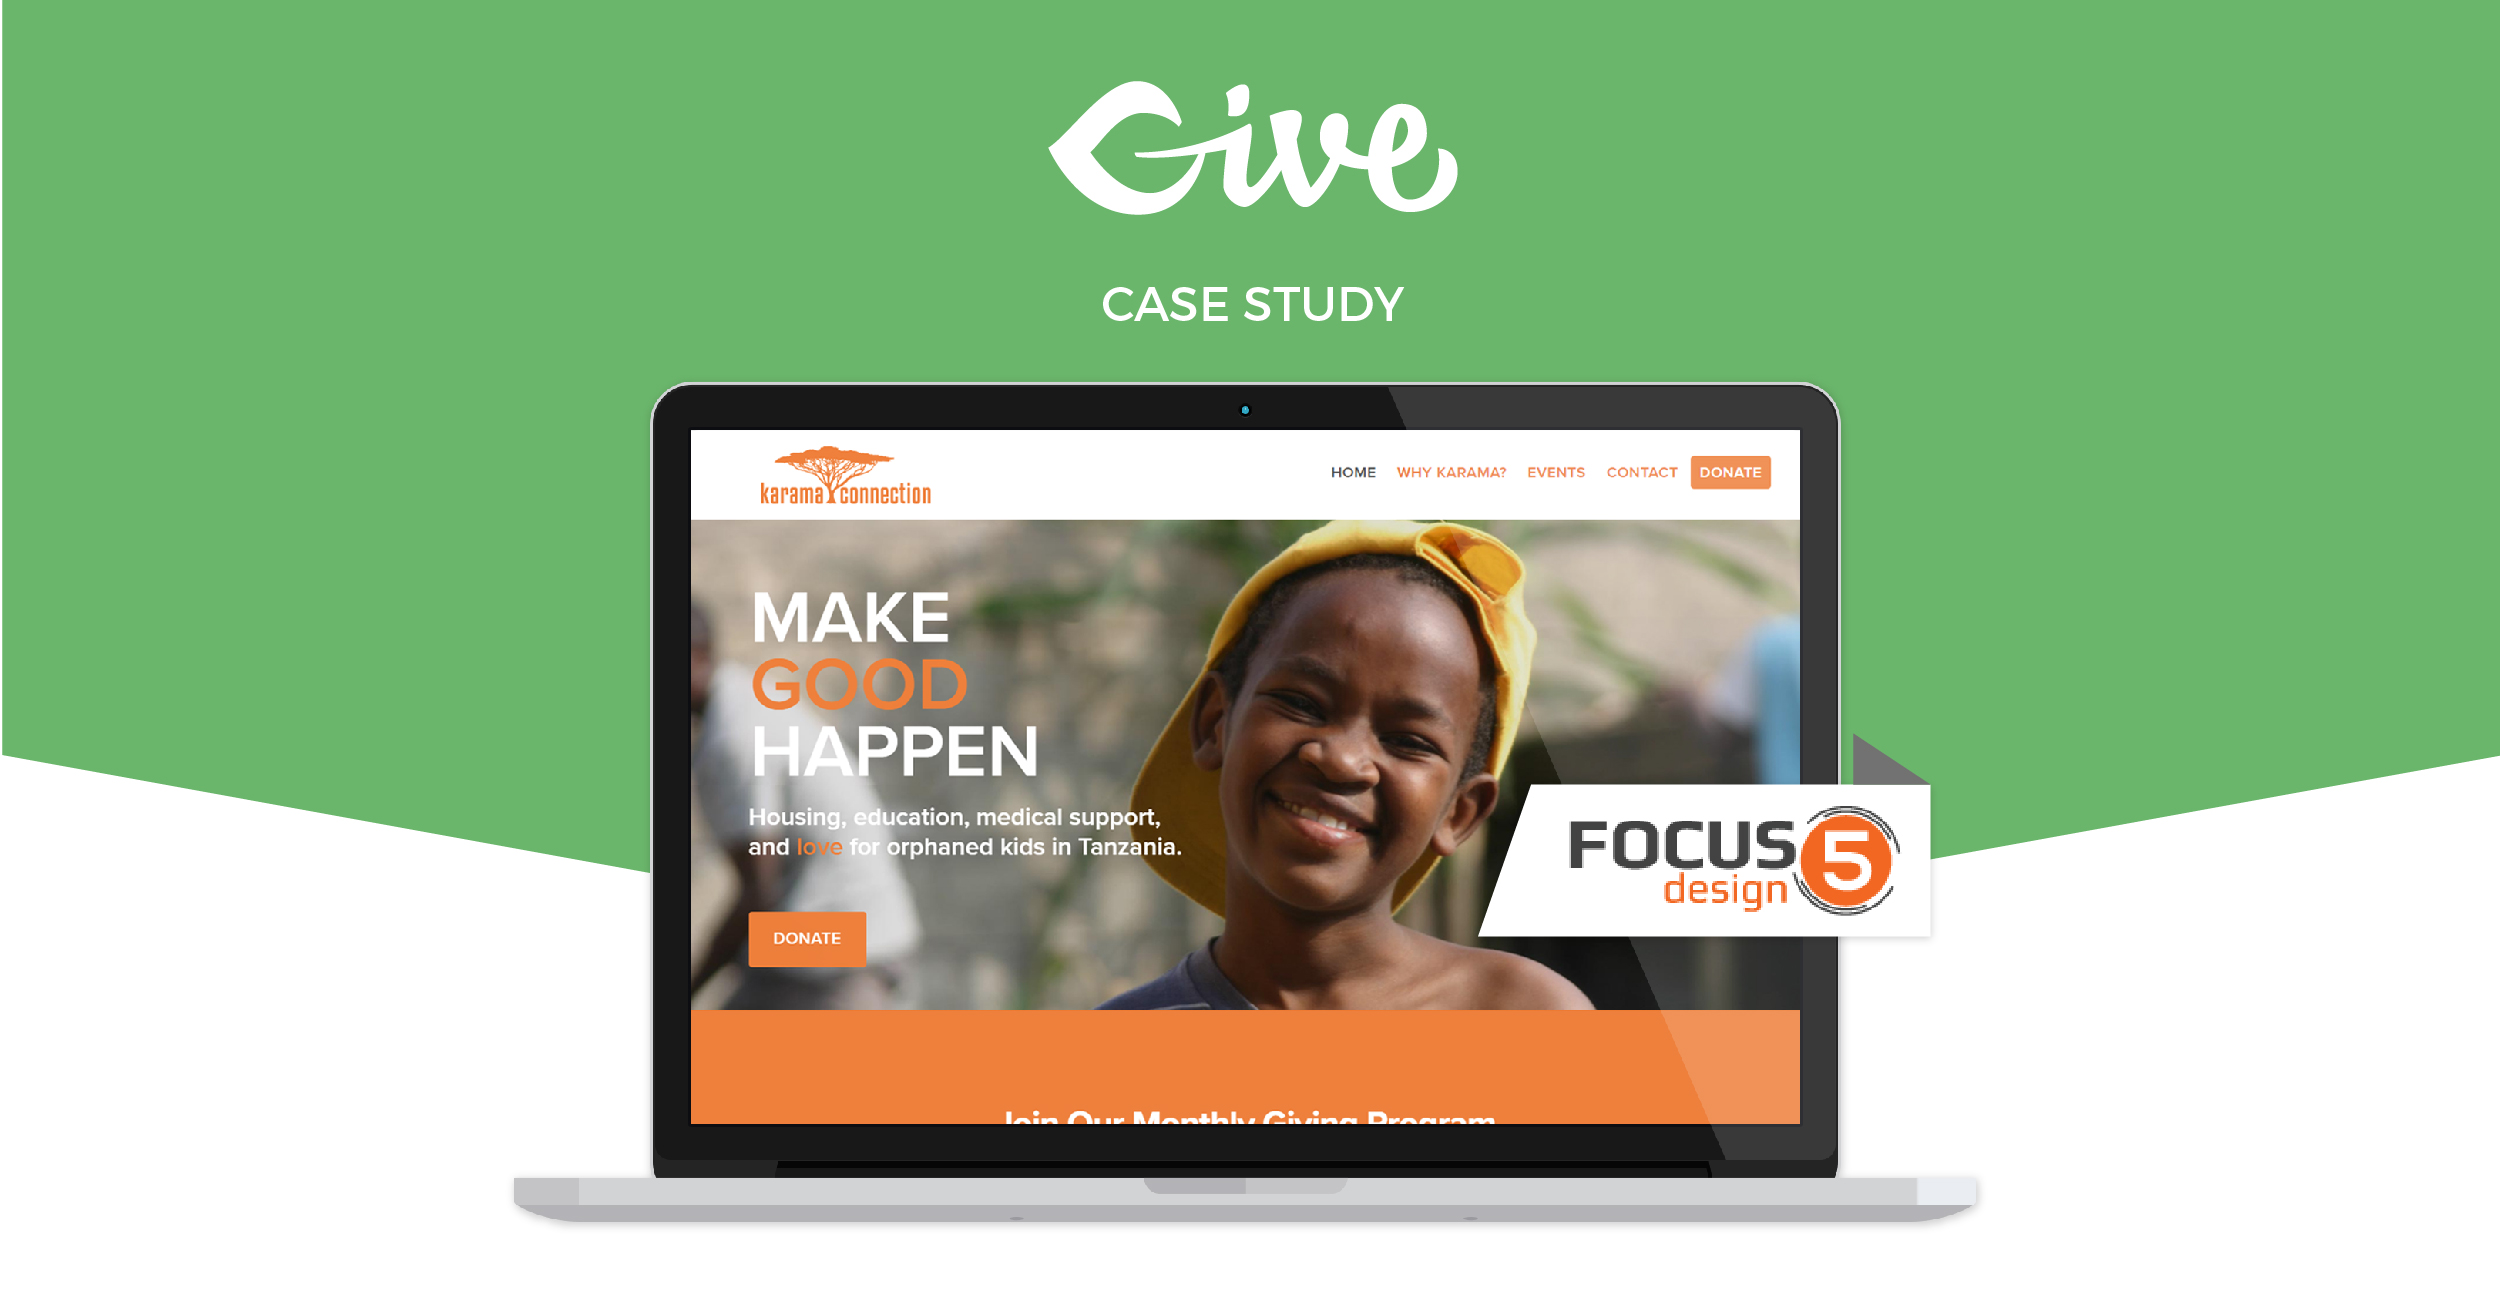 Focus 5 Design was able to help their nonprofit client, easily integrating Give with MailChimp and ensuring donor data is protected and secure.